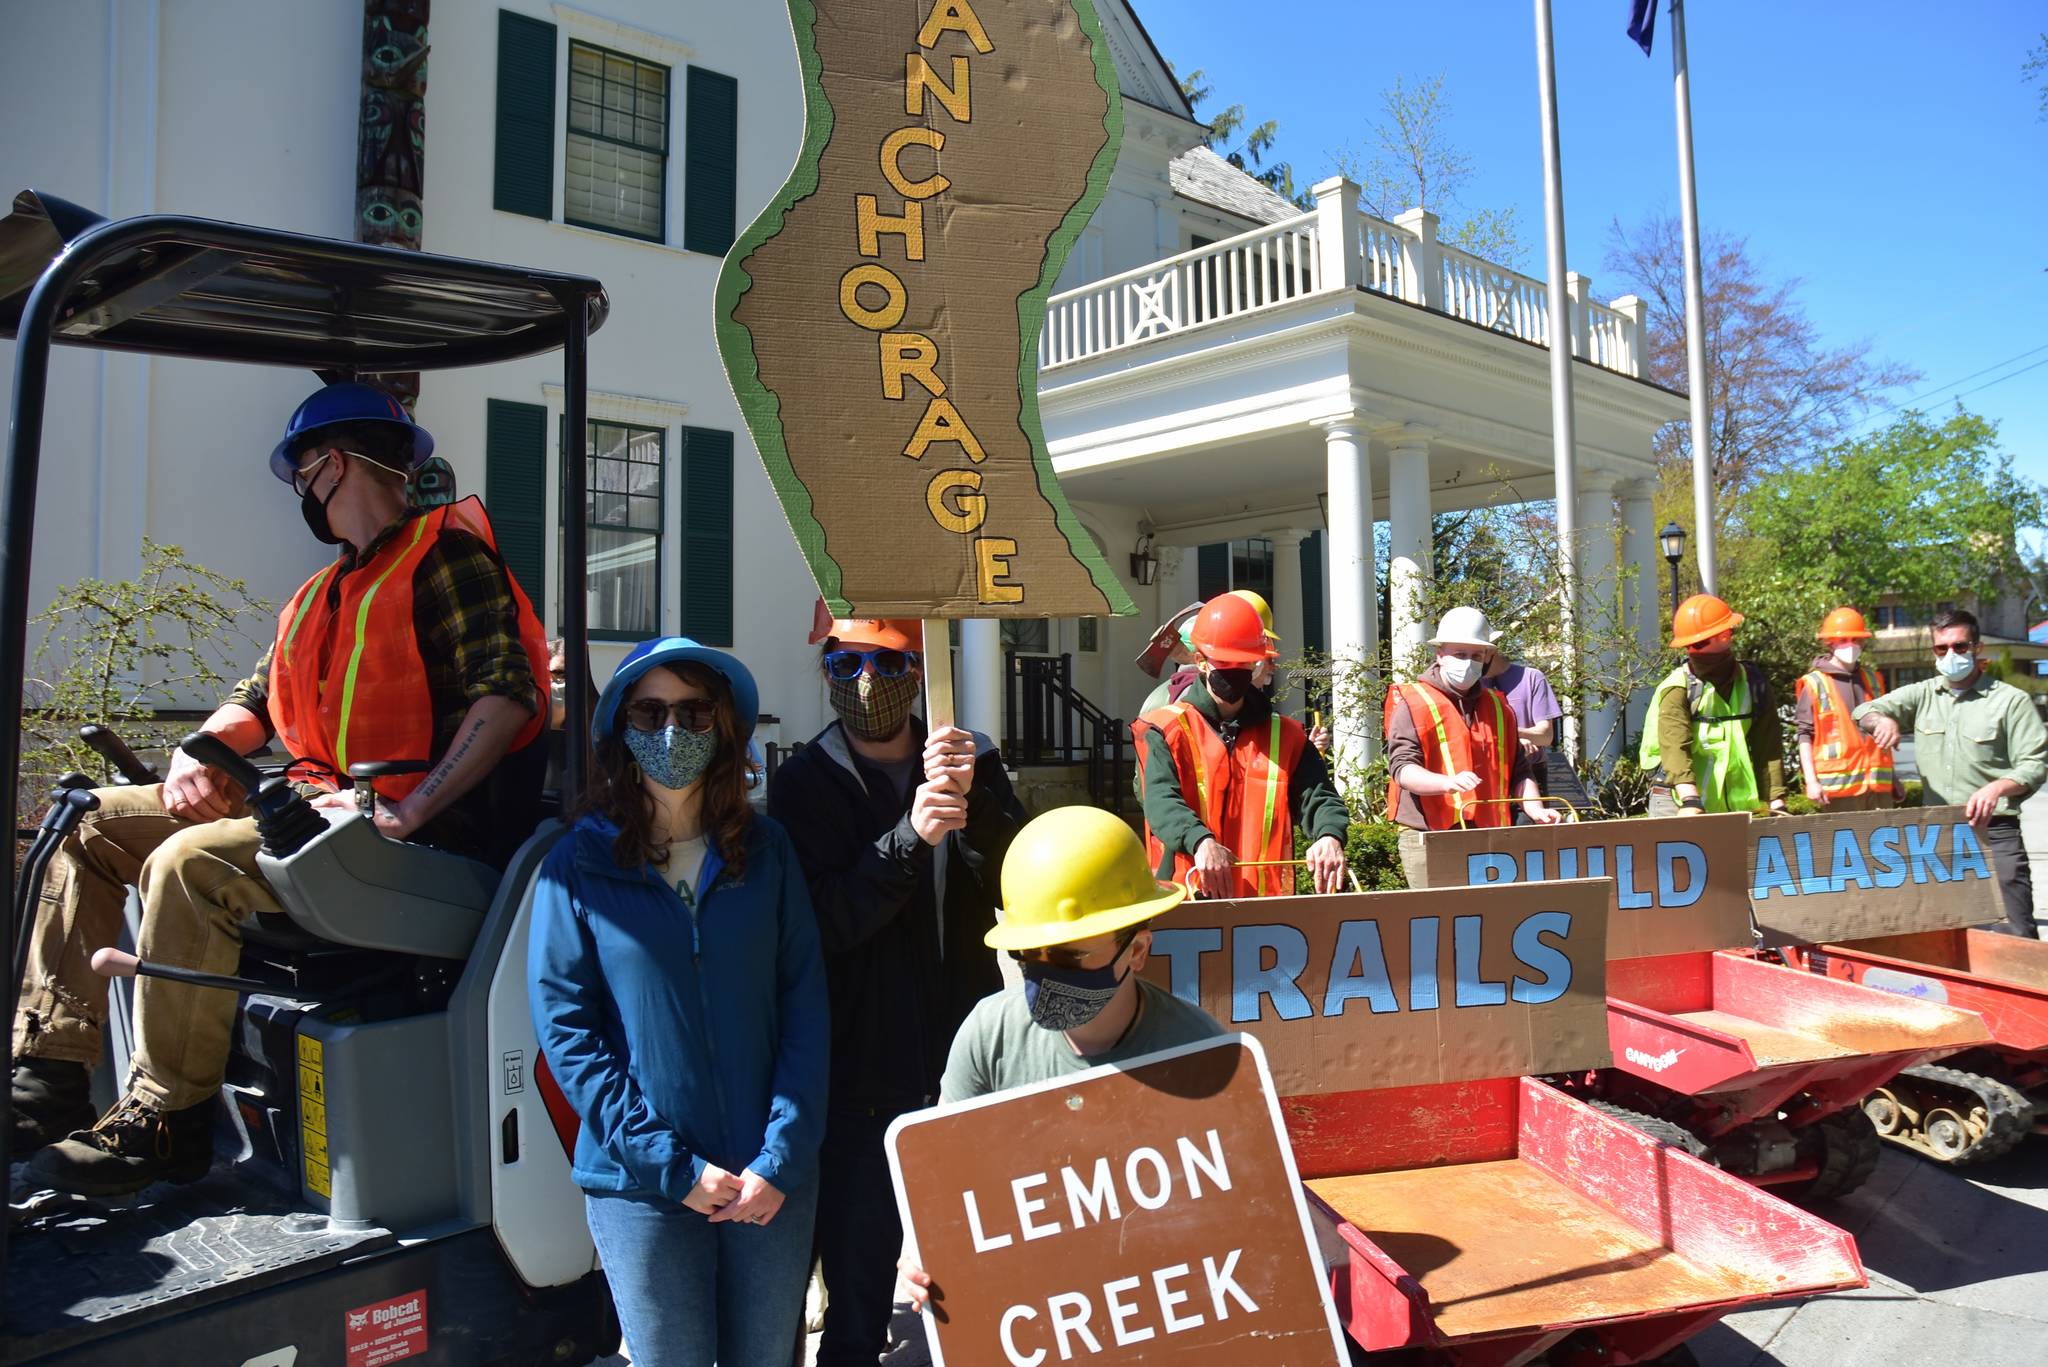 Supporters of the trail-building conservation corps started with CARES Act funding rallied in front of the Governor’s Mansion on Tuesday, May 18, 2021, to urge state officials to continue funding